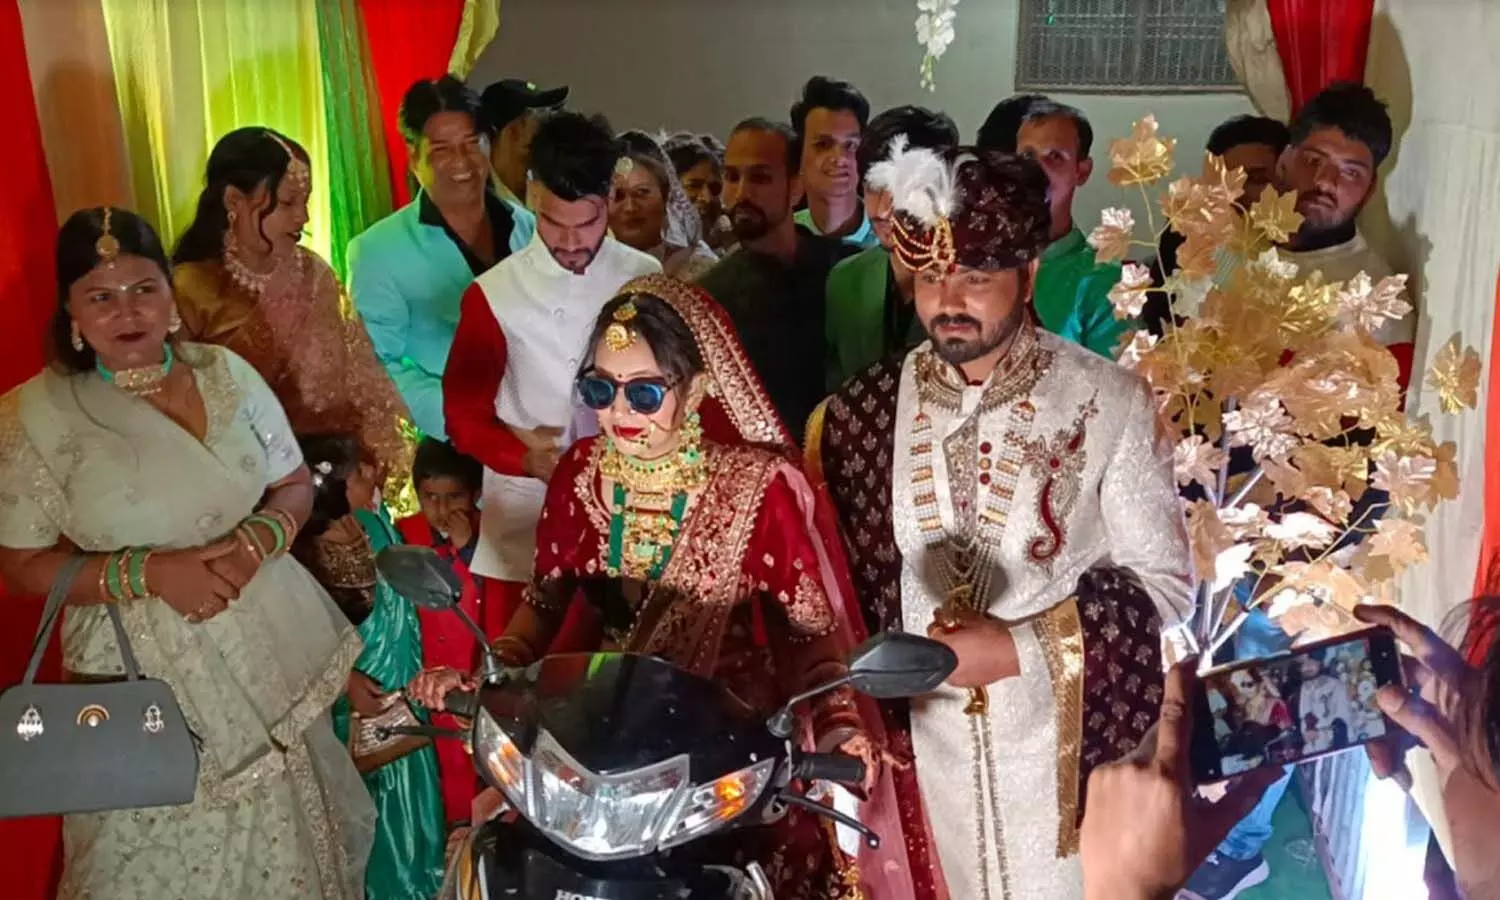 Firozabad News: Delhis bride brought the procession, entry in the wedding pavilion on scooty, people welcomed with applause